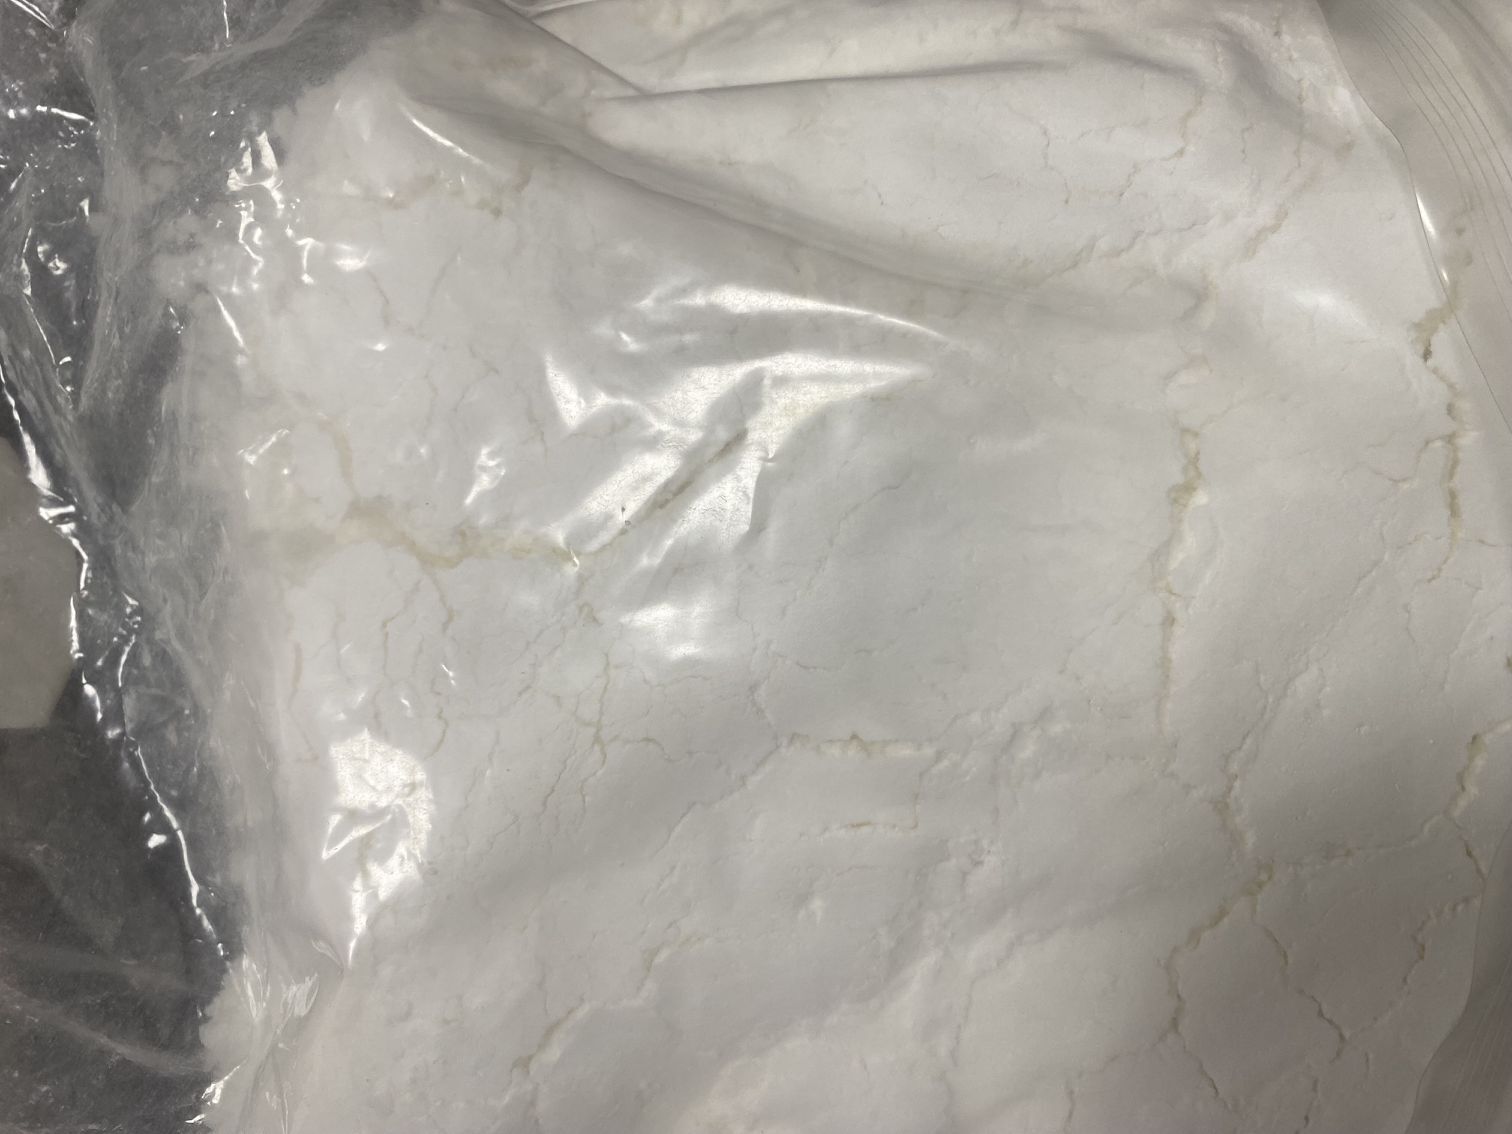  High Purity Pyrazolam CAS 39243-02-2 Suppliers with Good Price 